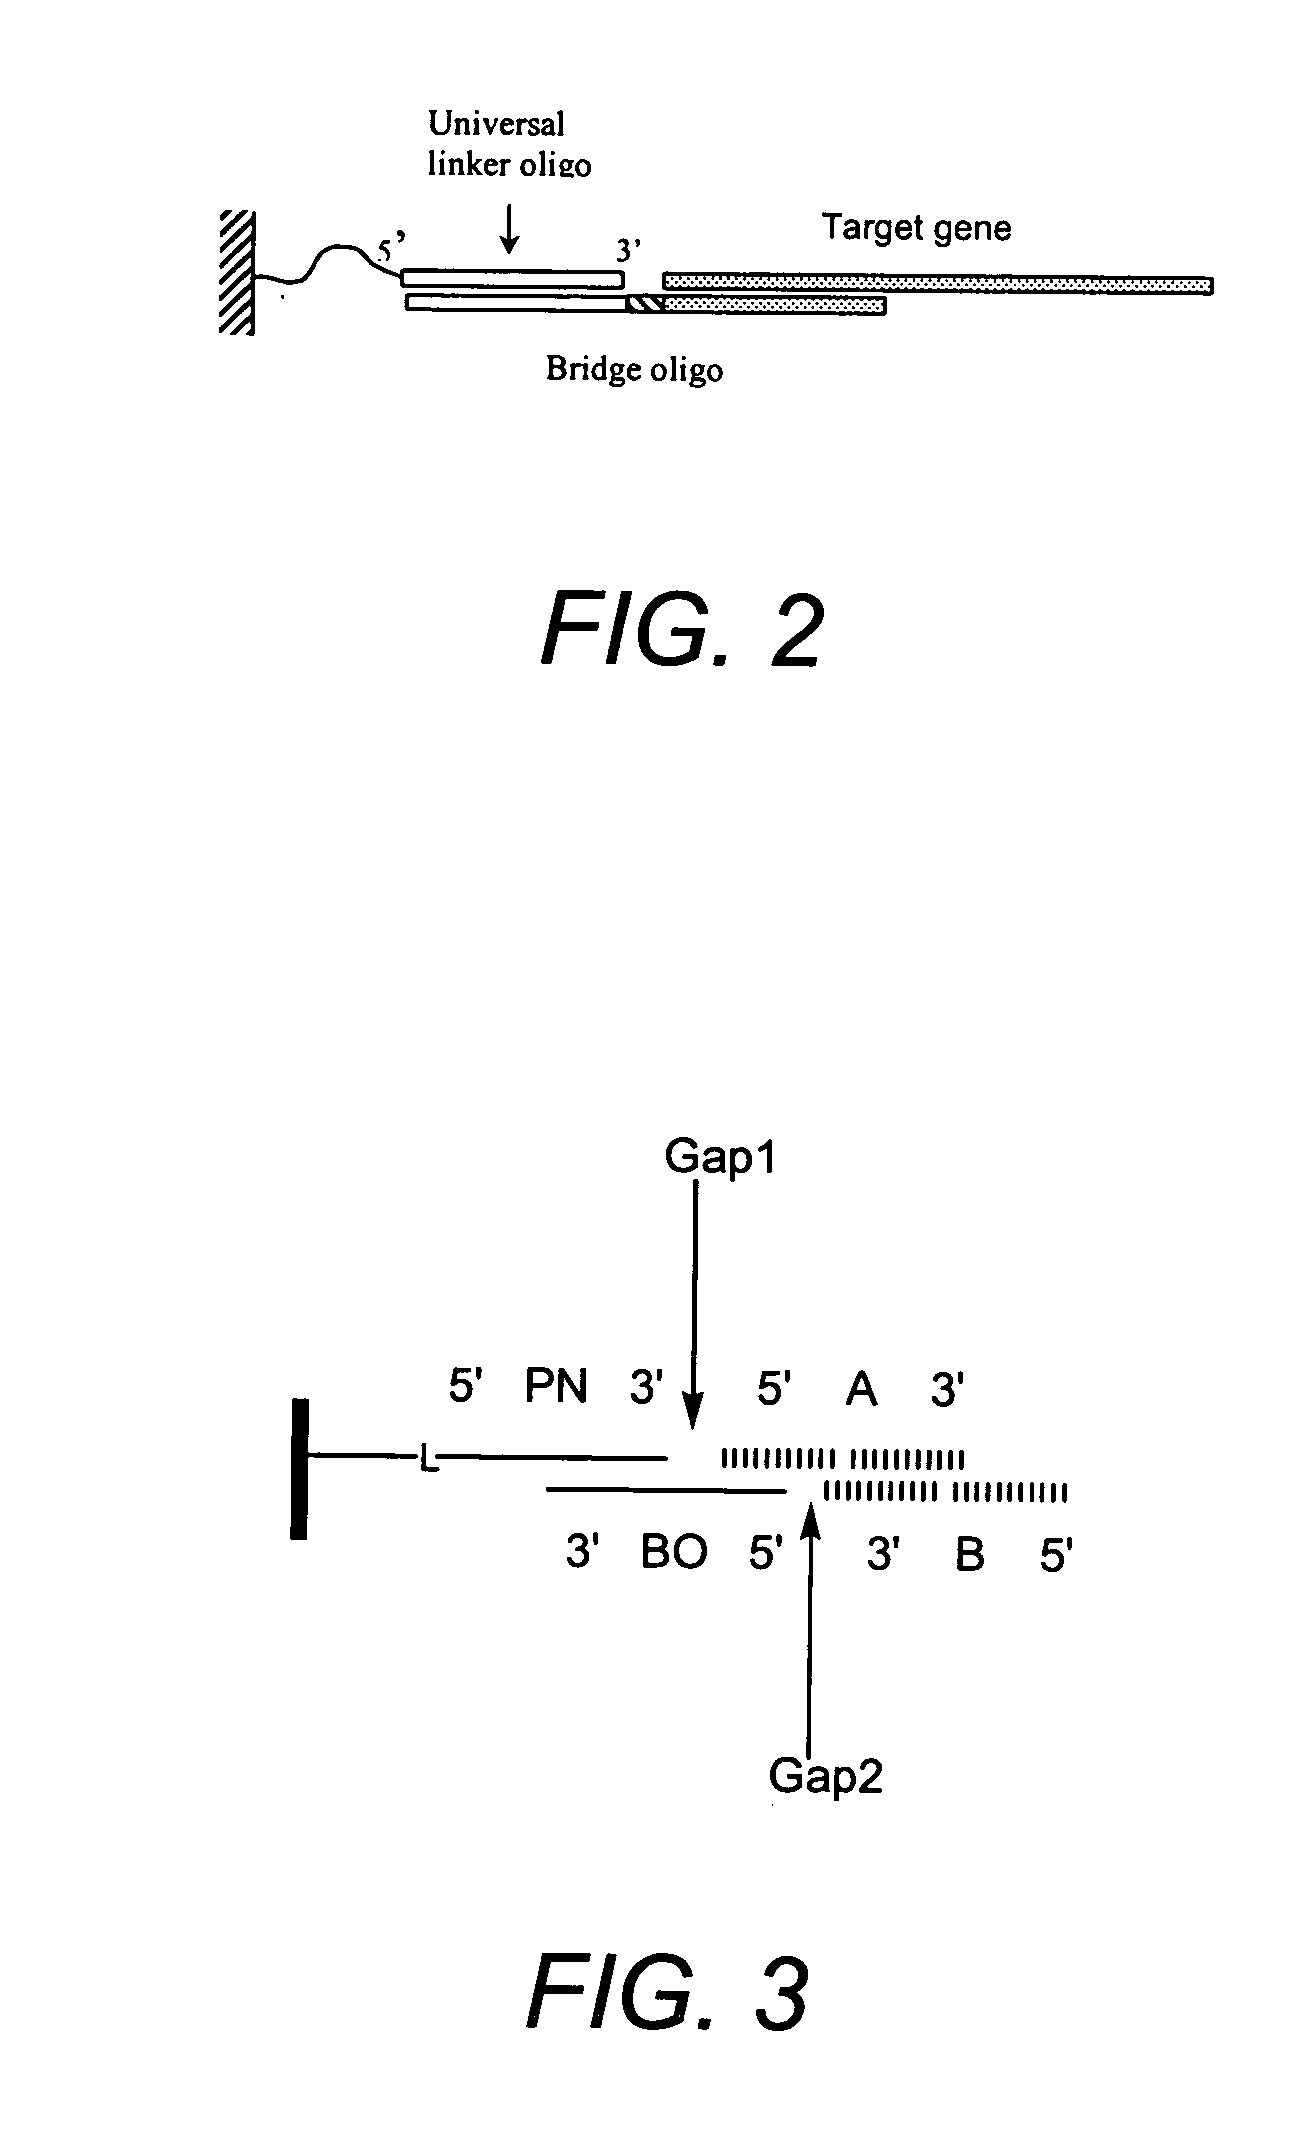 Solid phase methods for polynucleotide production